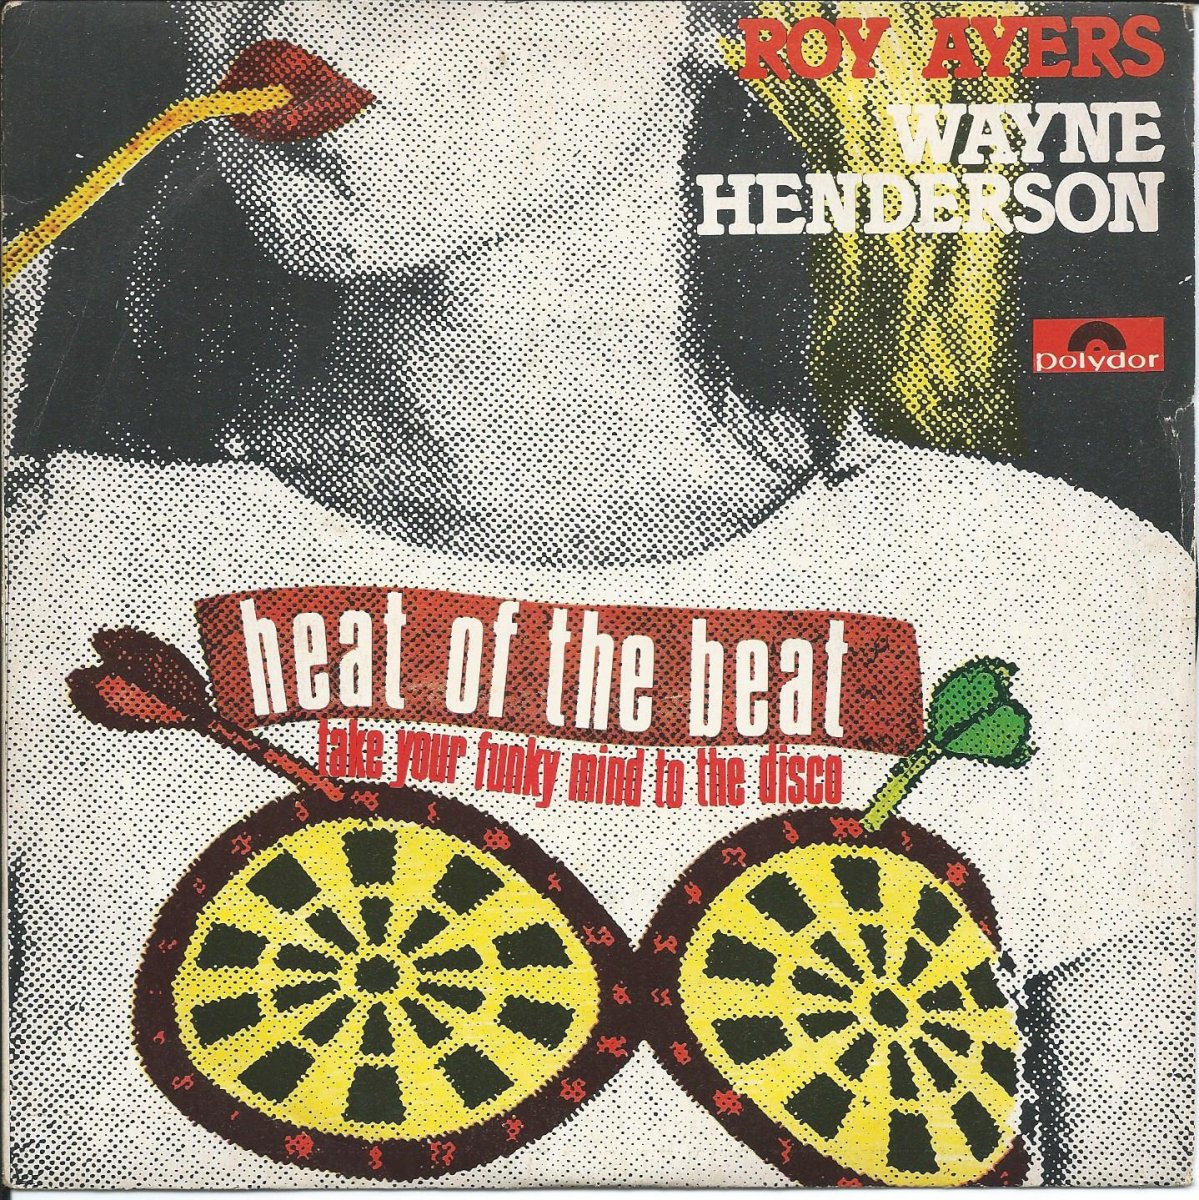 ROY AYERS / WAYNE HENDERSON ‎/ HEAT OF THE BEAT / TAKE YOUR FUNKY MIND TO THE DISCO (7